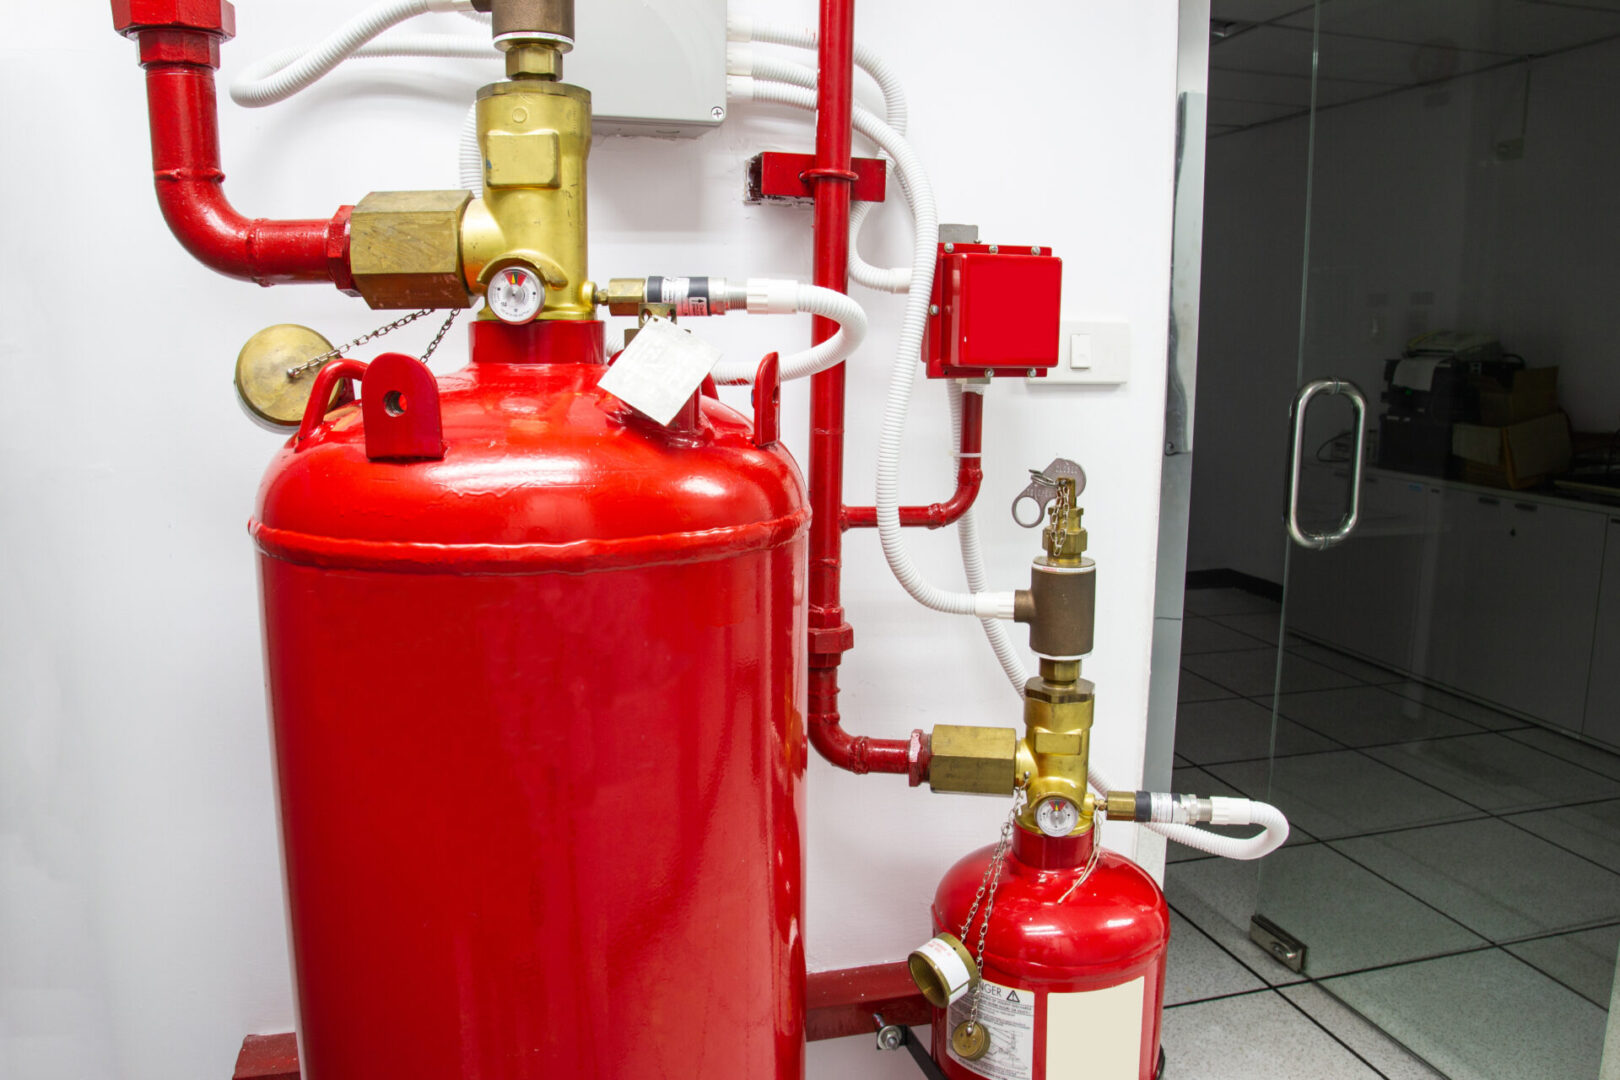 A red fire hydrant and some pipes in a room.